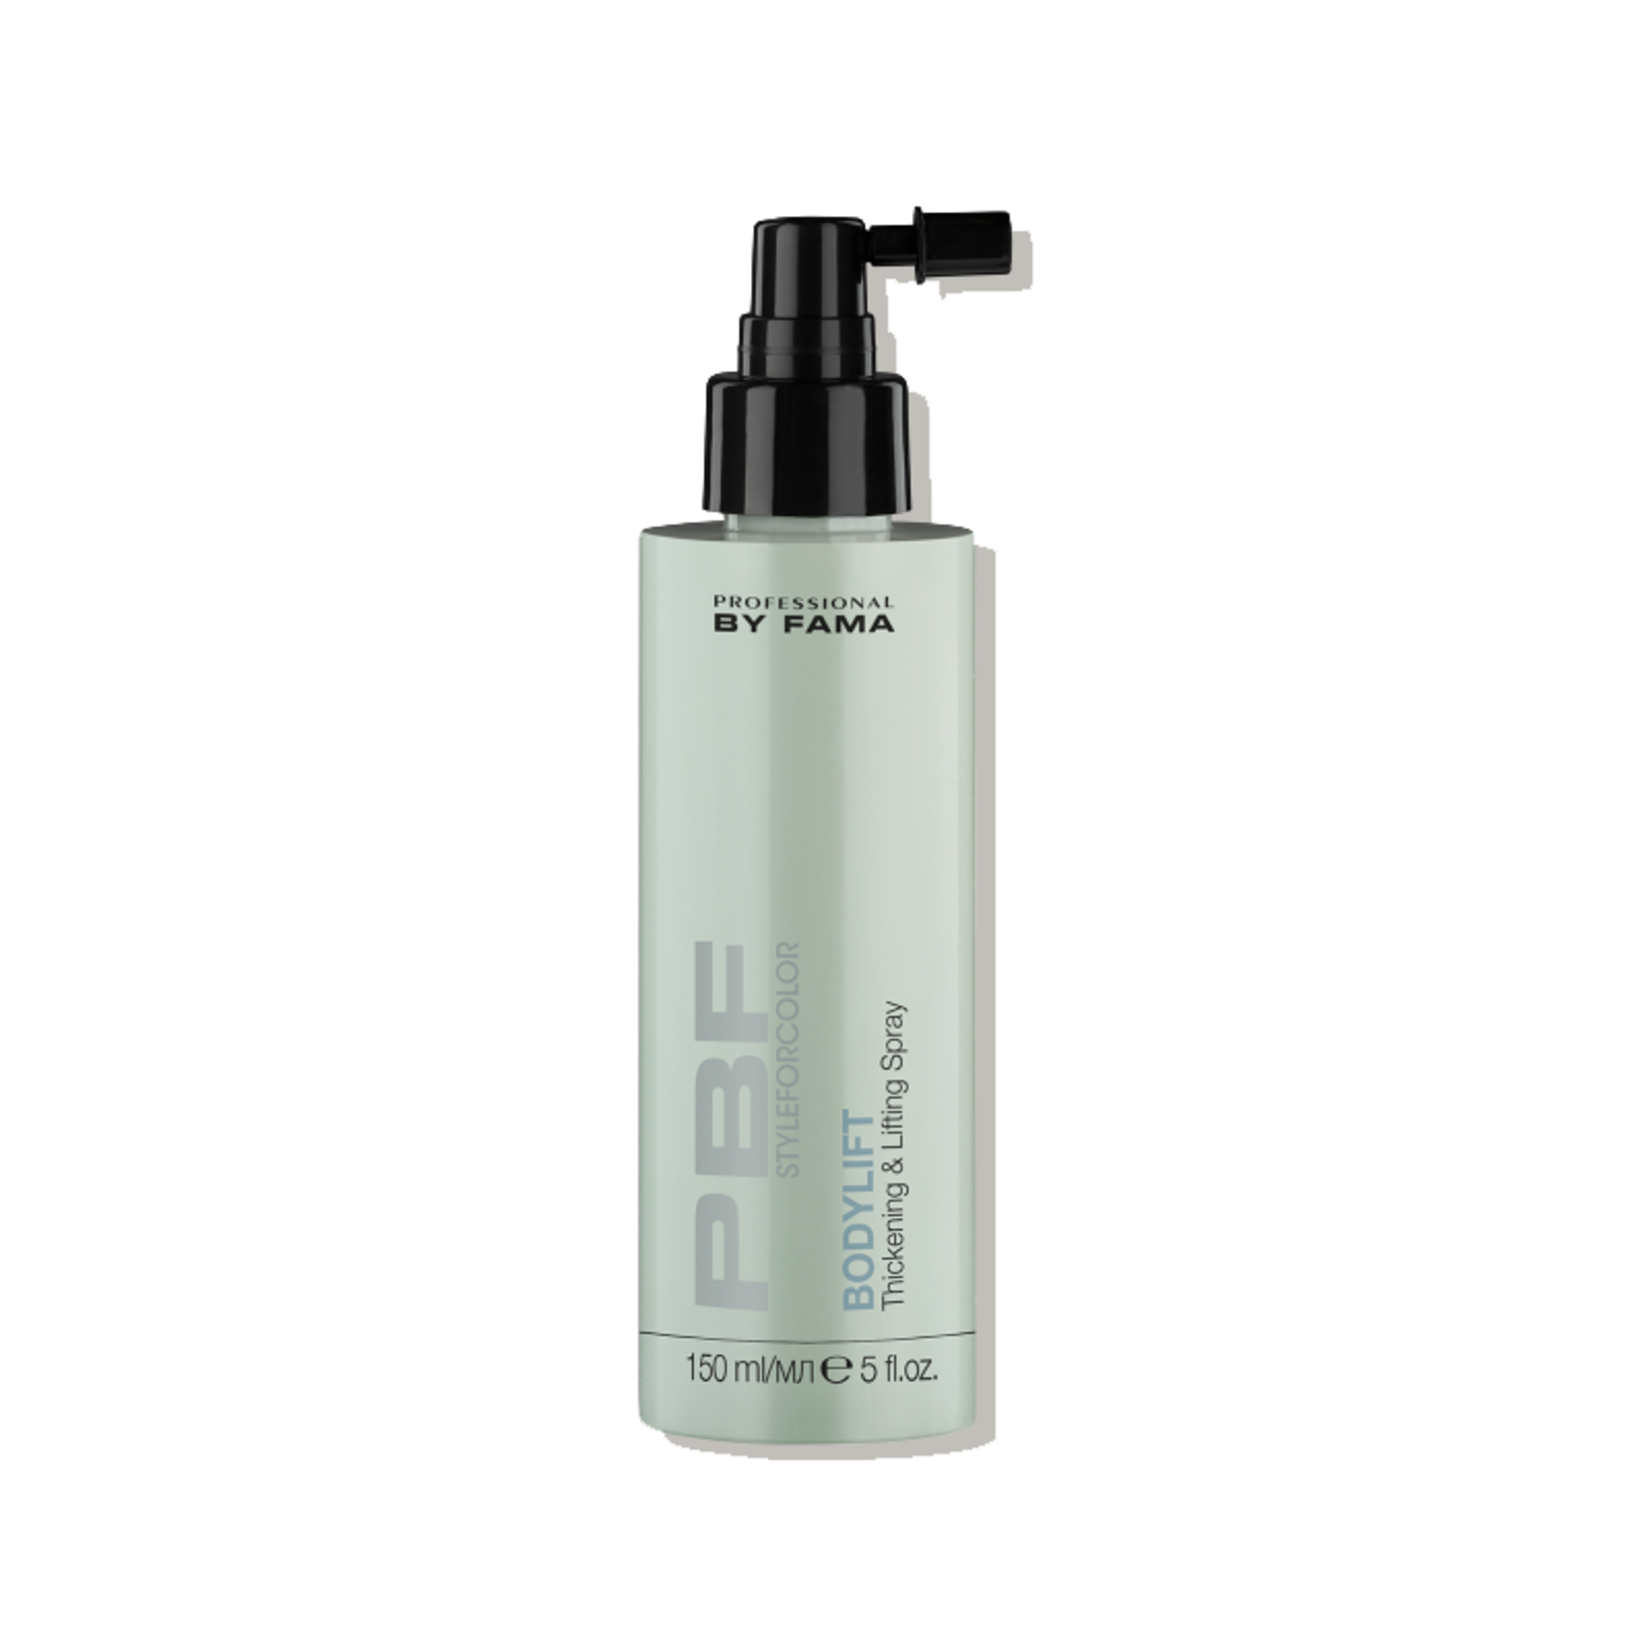 Professional BY FAMA By Fama - Bodylift - Thickening & Lifting Spray 150ml